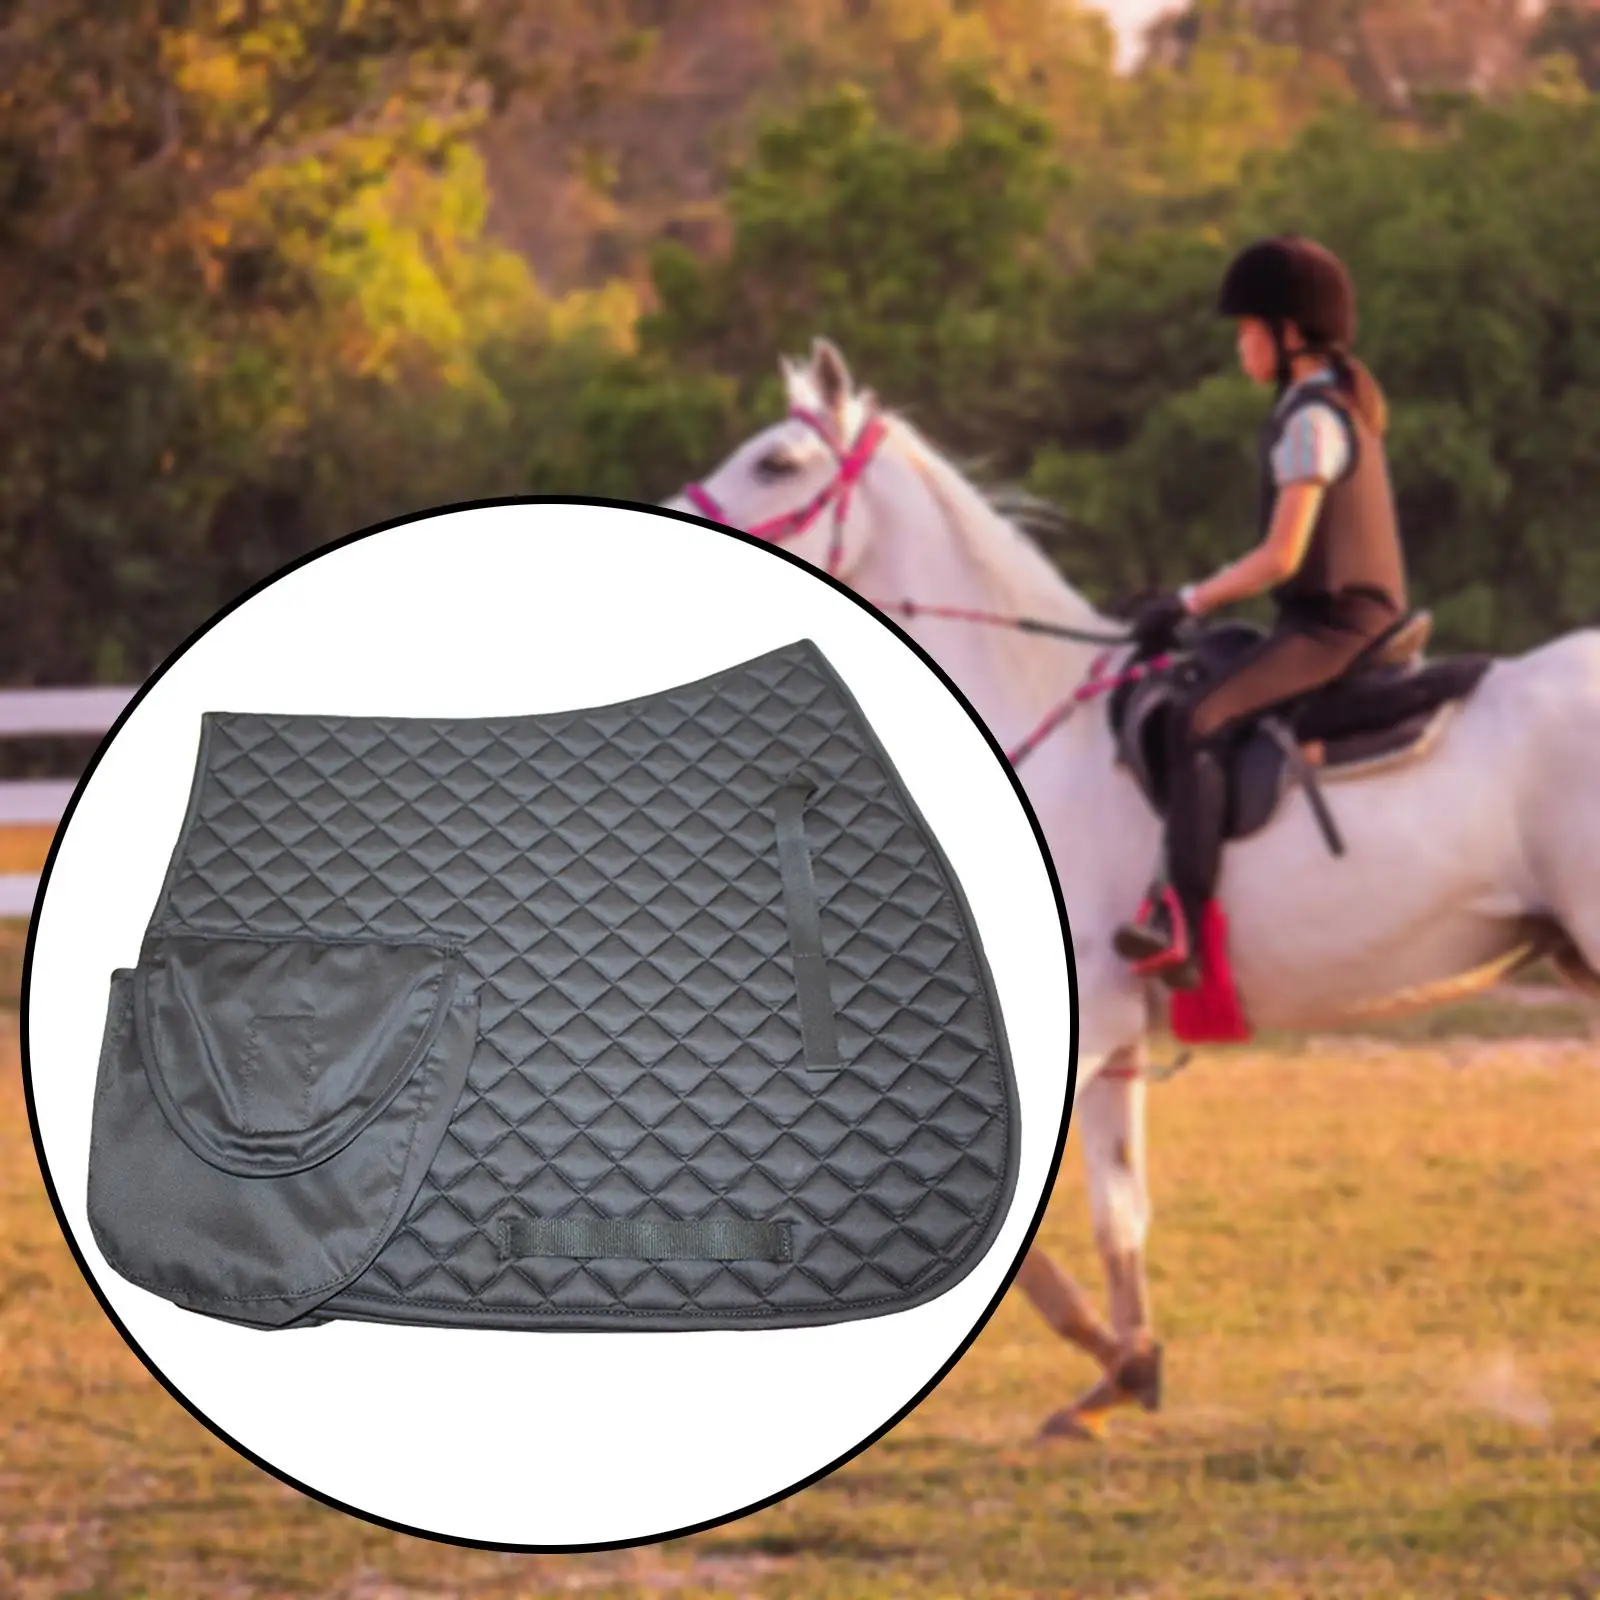 Horse Saddle Pad Mat Cotton Cushion Sports Accessory Protective Wear Resistant with Storage Pocket Sweat Absorbent Riding Pad